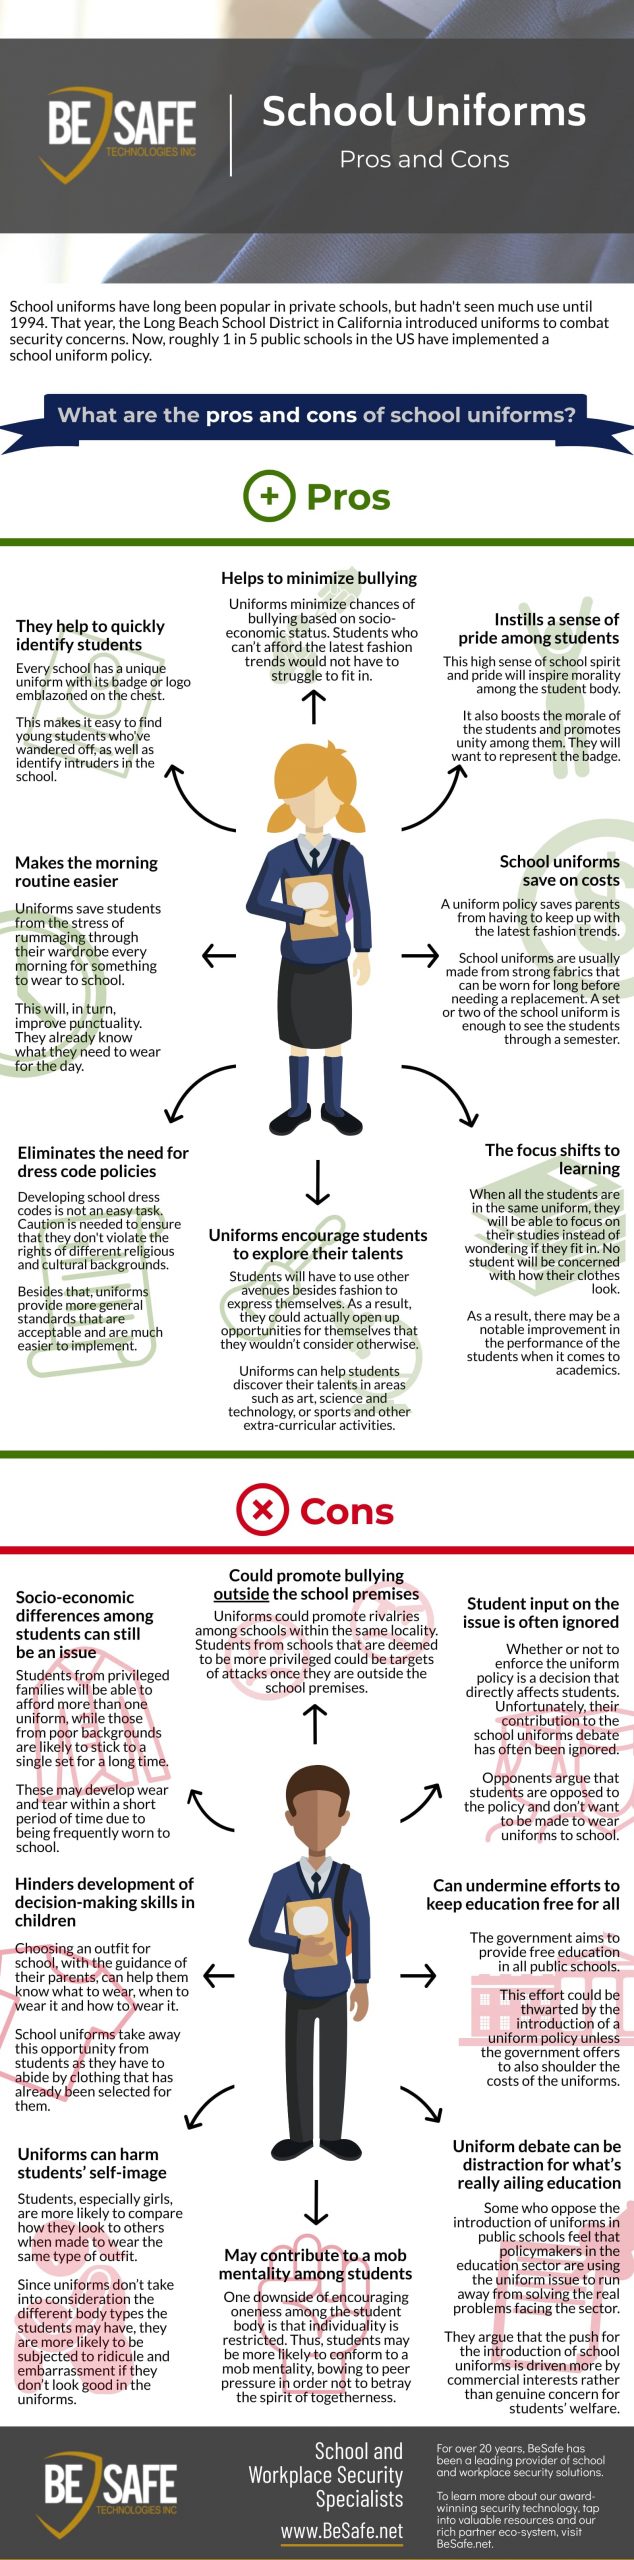 The pros and cons of a school uniform